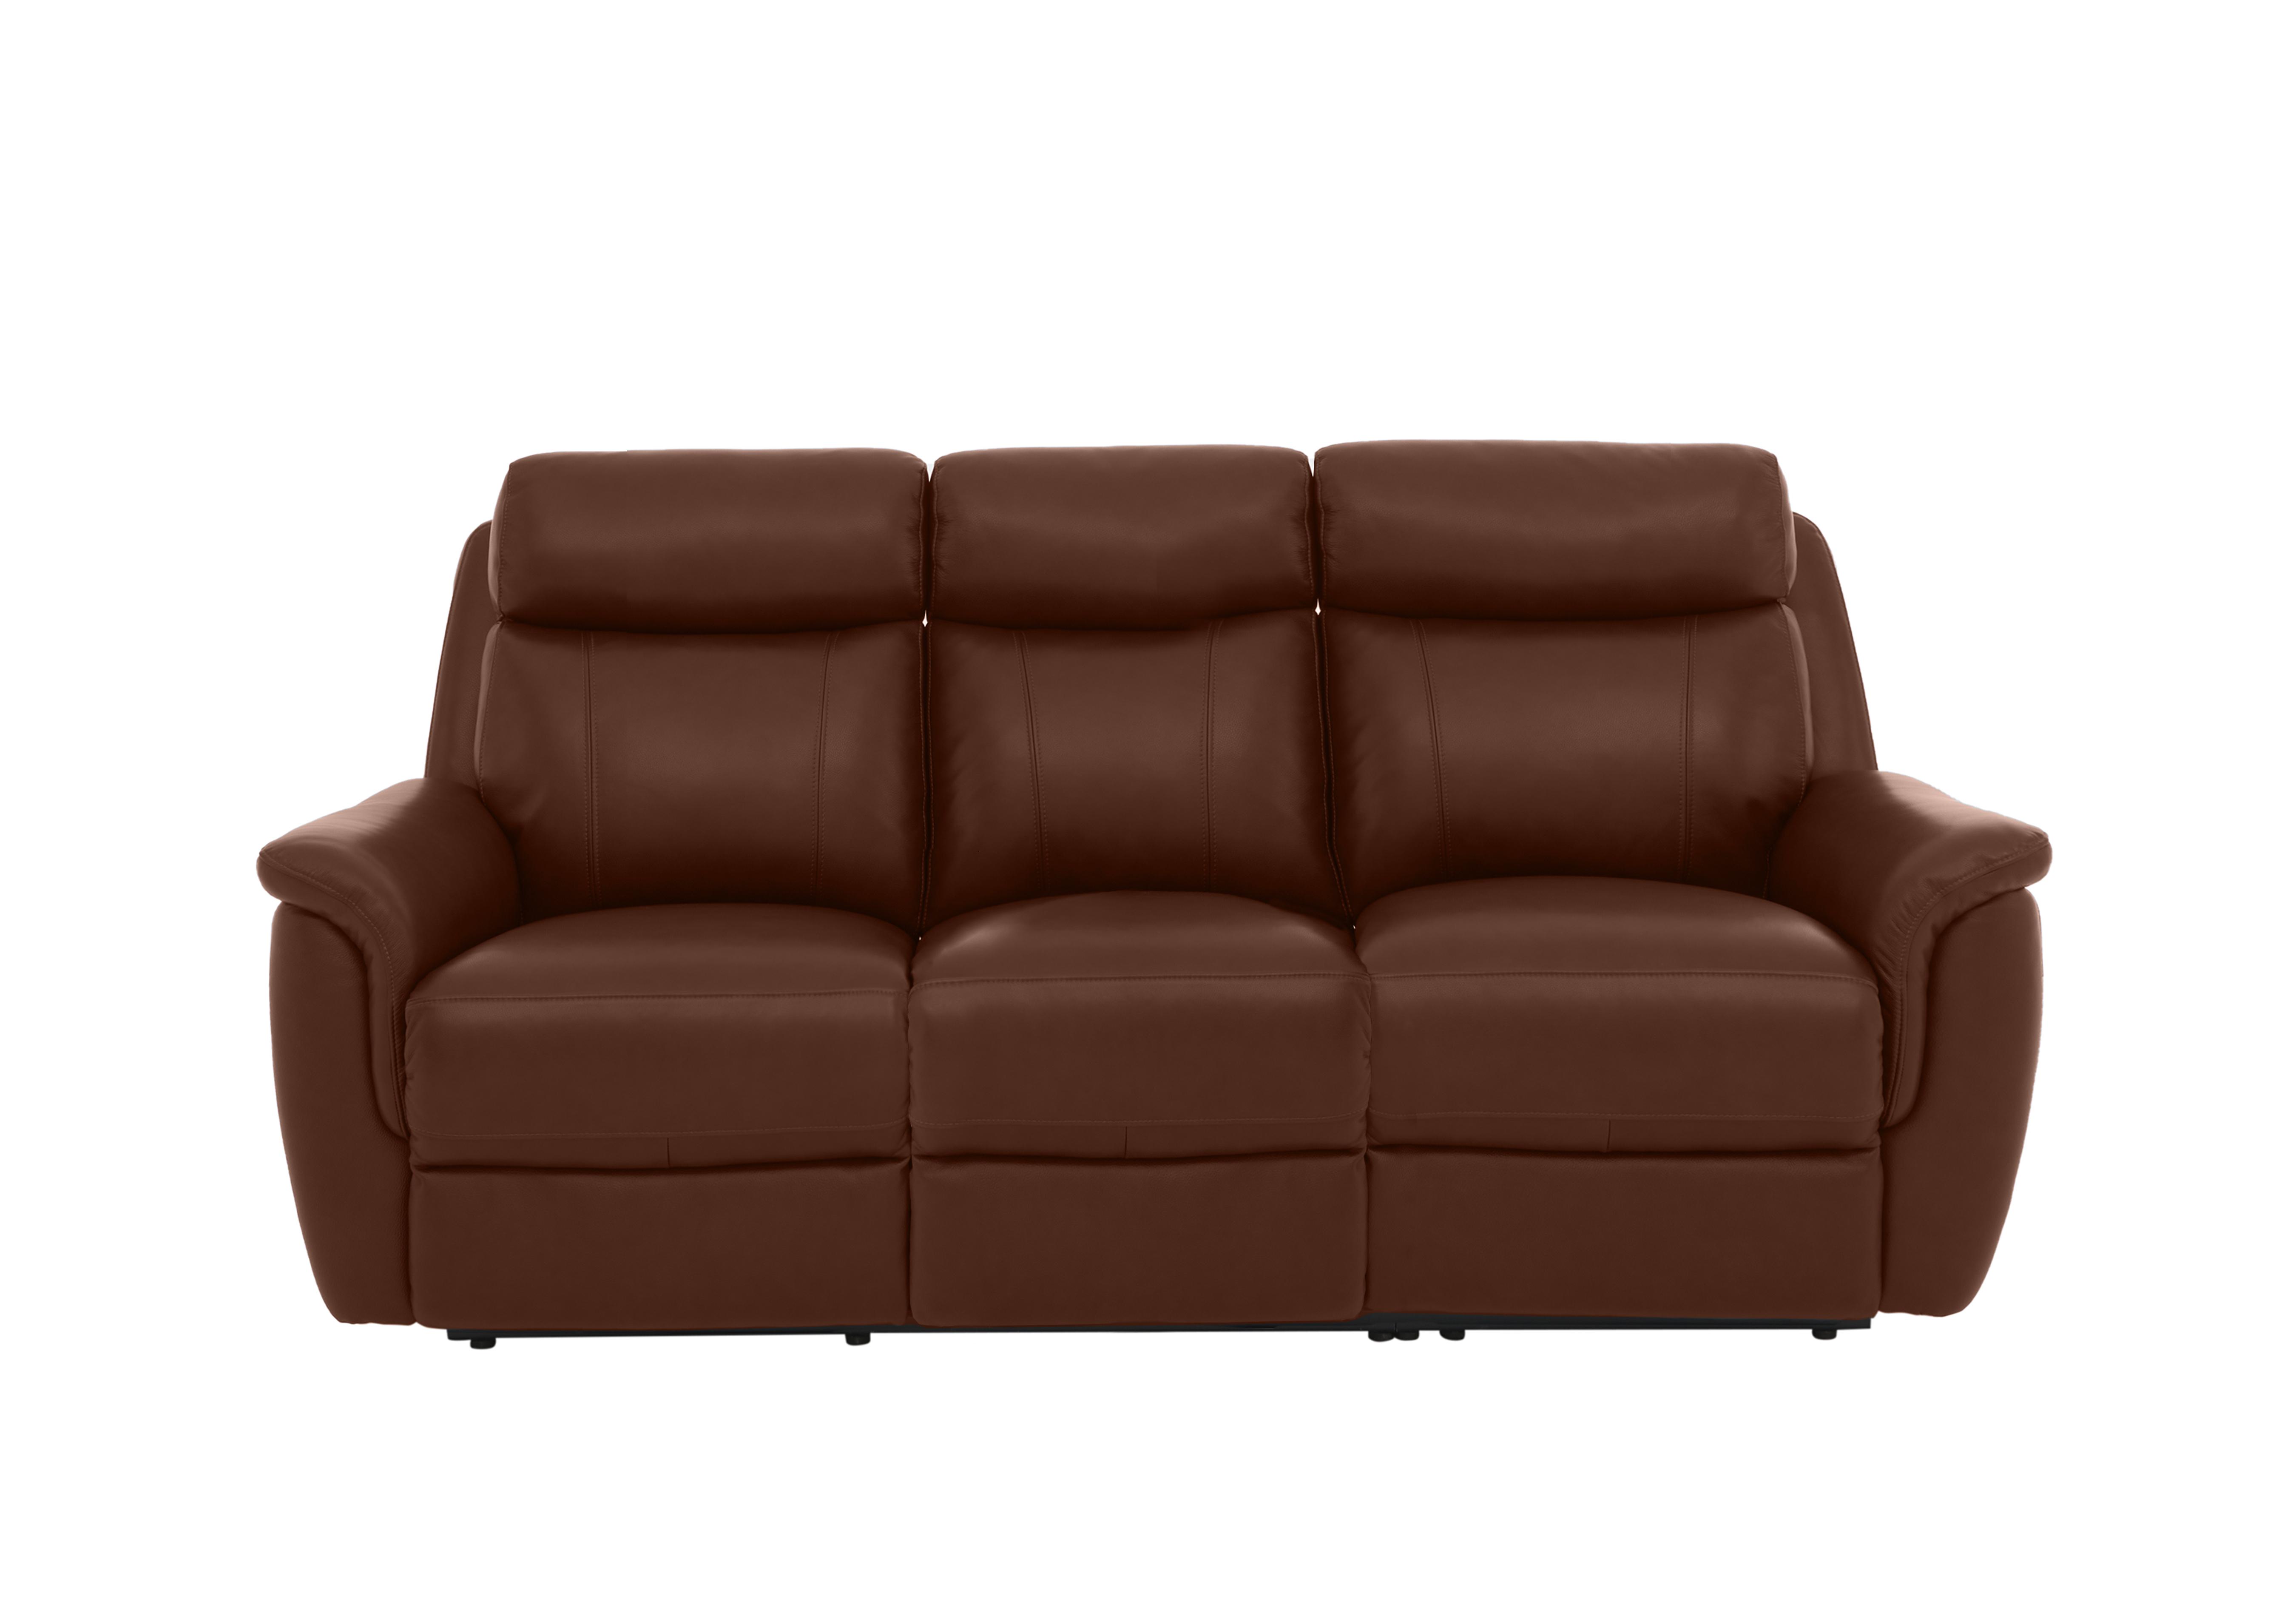 Orlando 3 Seater Leather Power Recliner Sofa with Power Headrests in 60/07 Butterscotch on Furniture Village